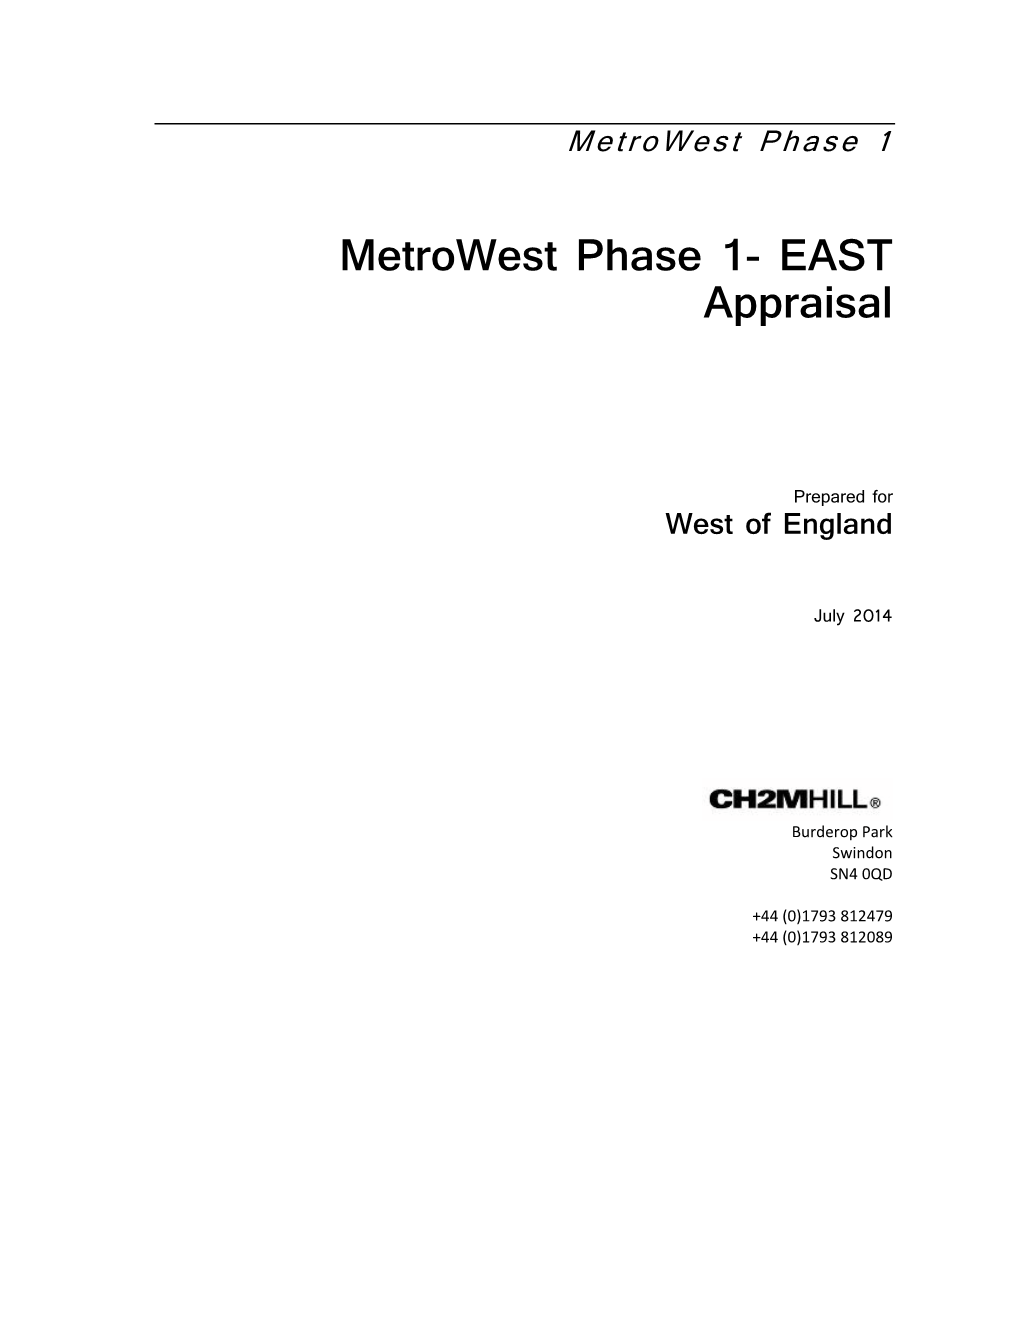 Metrowest Phase 1- EAST Appraisal